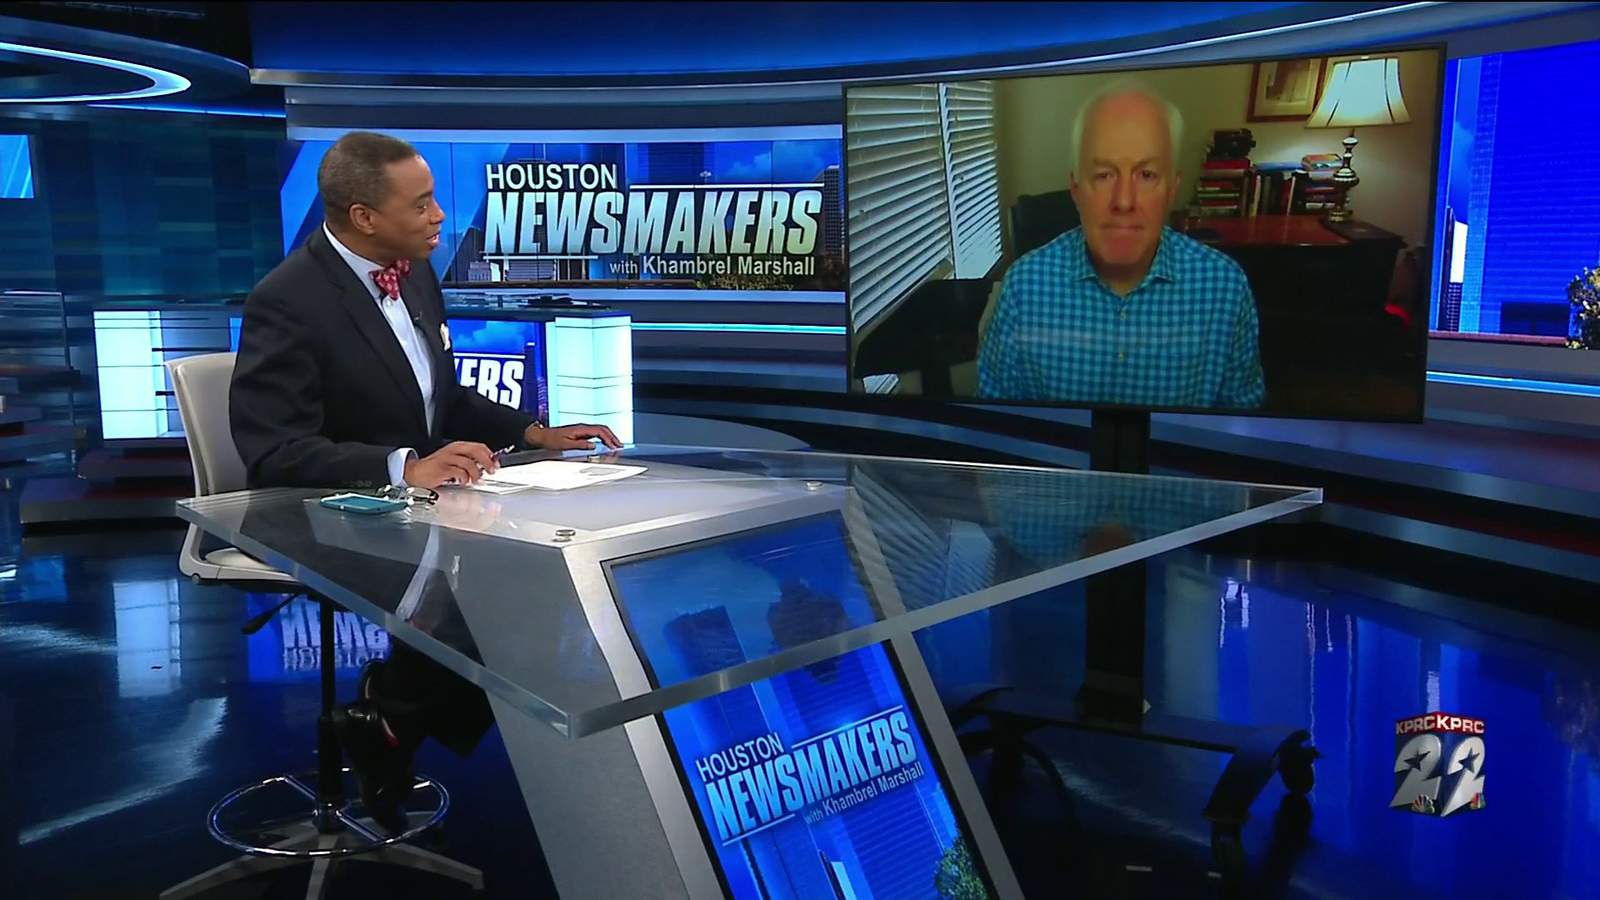 Houston Newsmakers: Cornyn confident but not comfortable